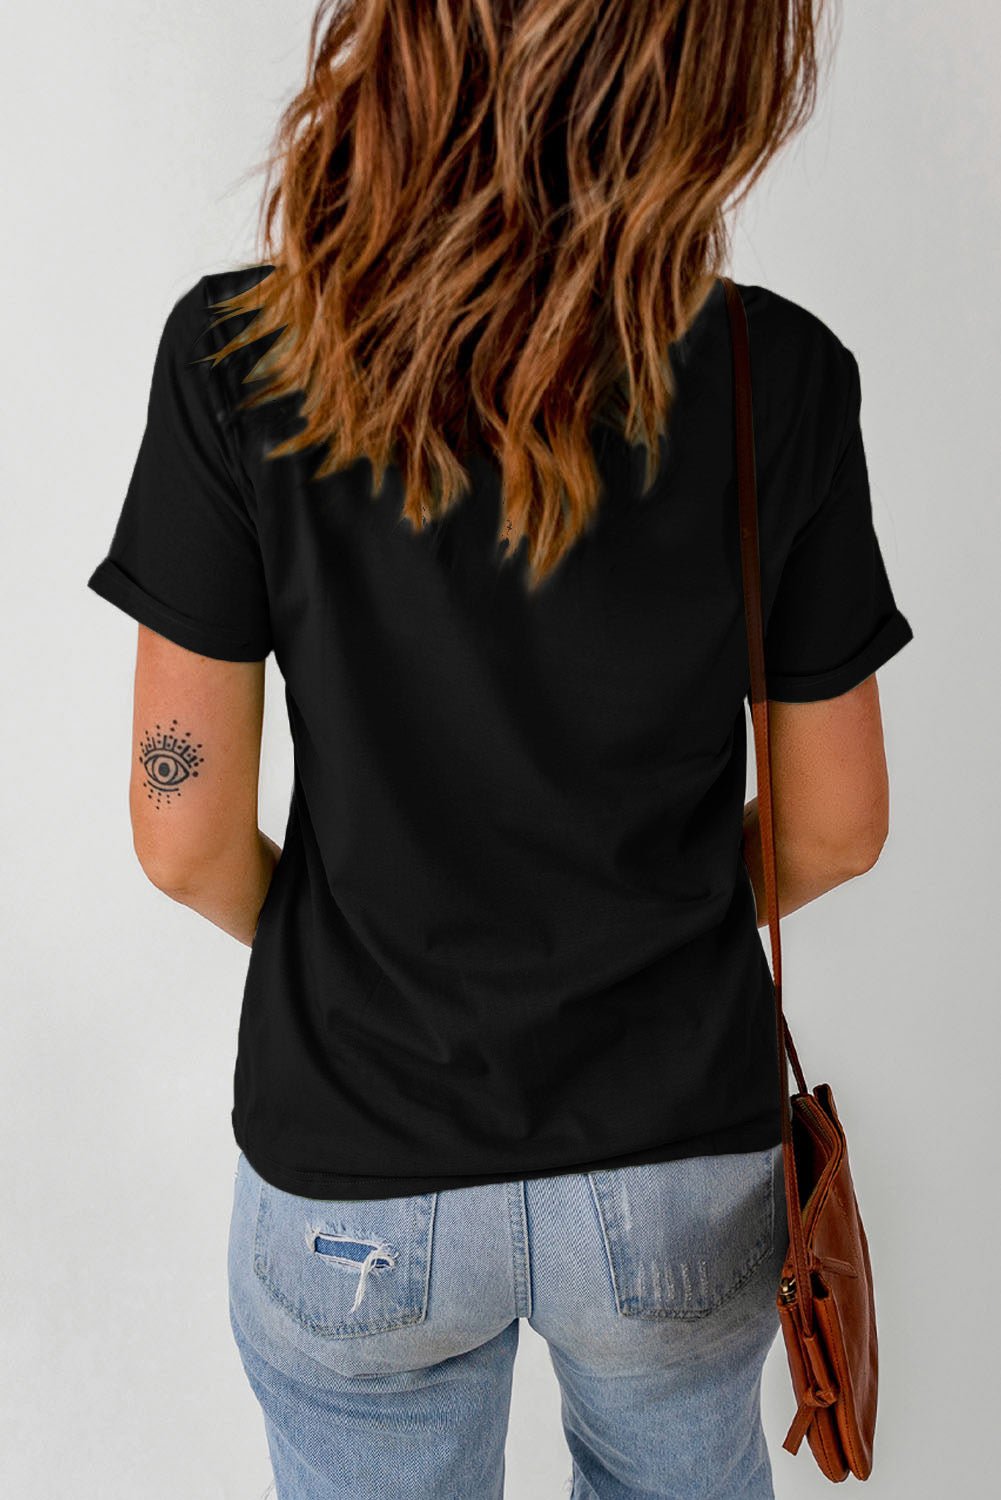 Letter Graphic Short Sleeve T-Shirt - Fashion Girl Online Store